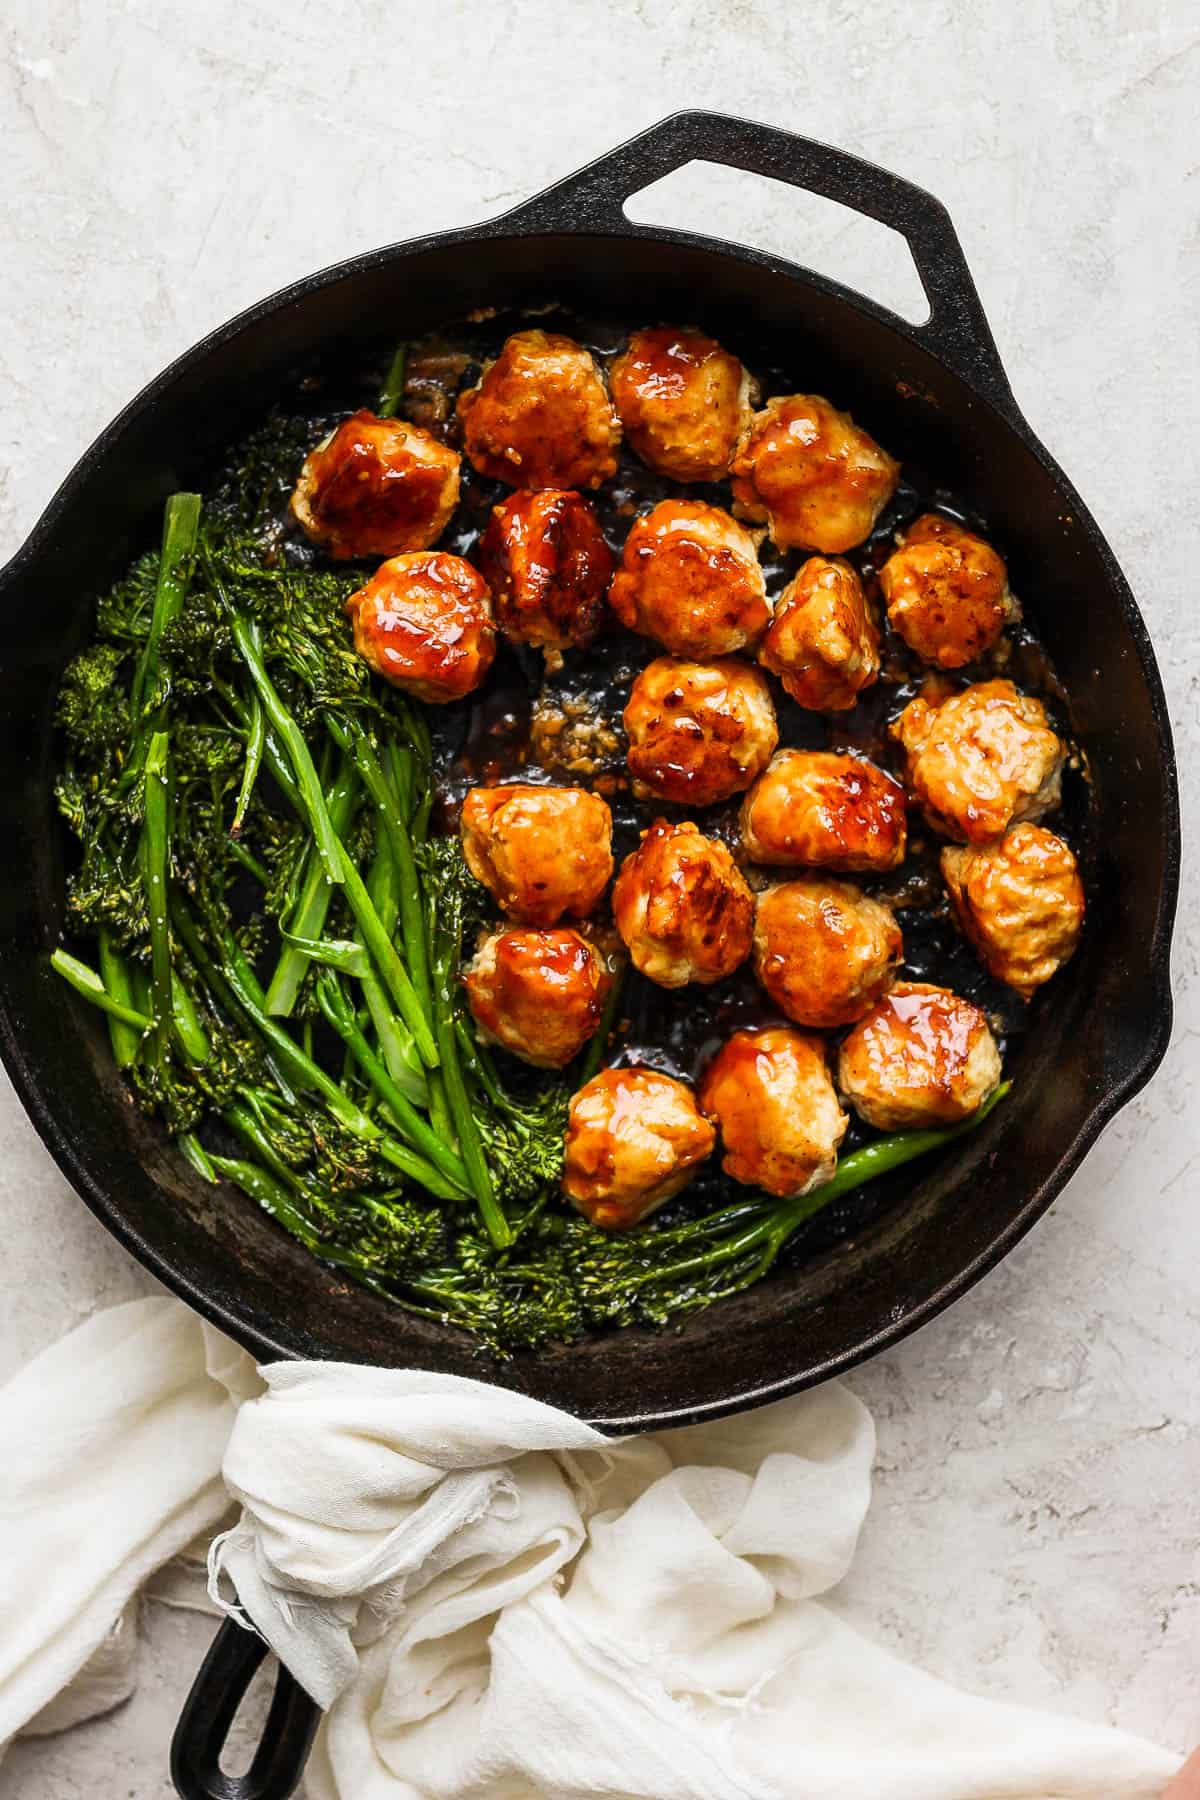 Chicken teriyaki meatballs in a skillet with broccolini.